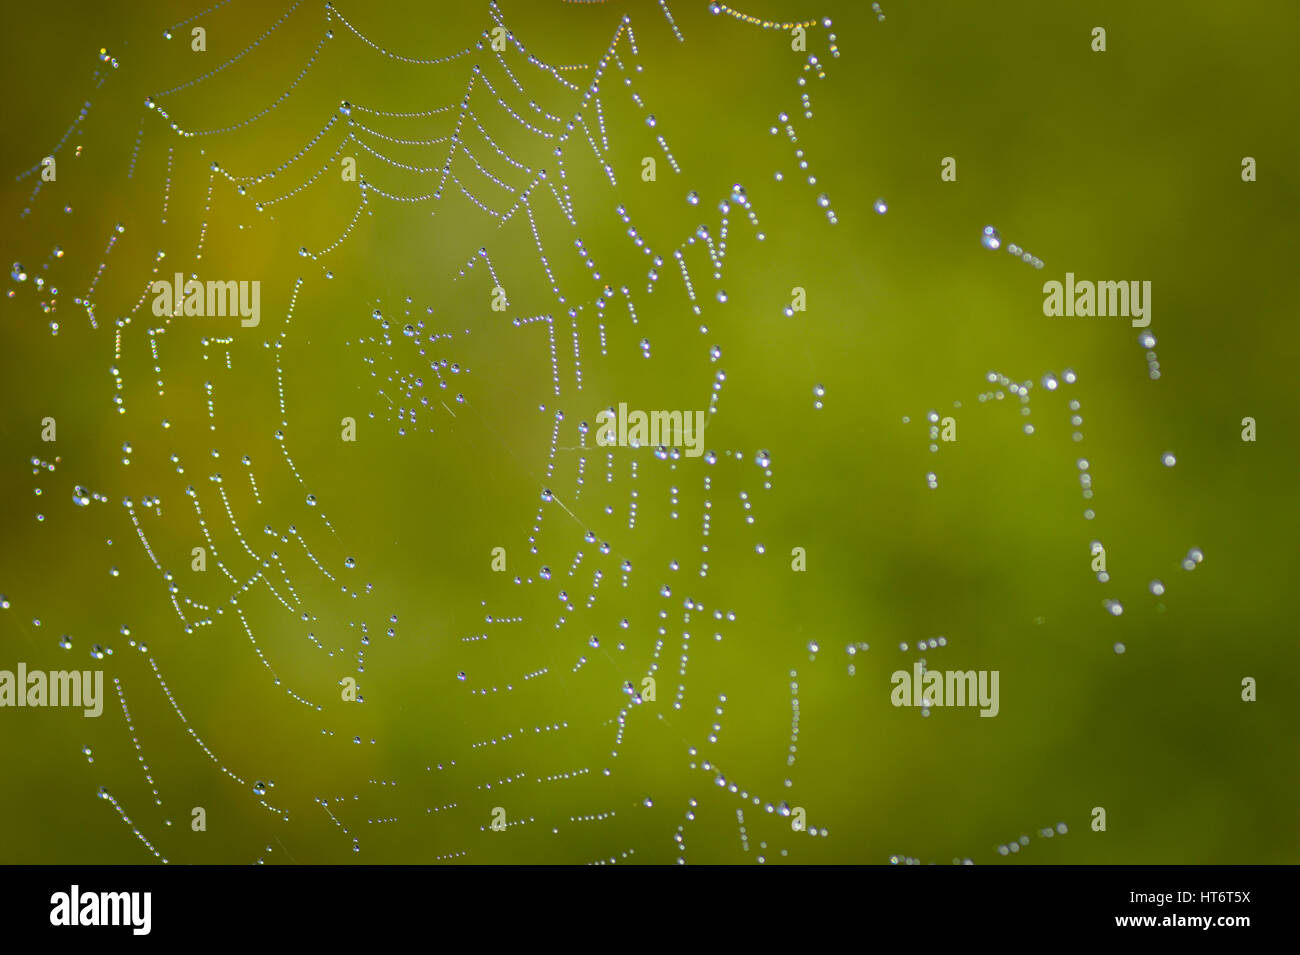 Spider web with morning dew drops which show visible reflections of garden bushes in water droplets when zoomed in close up - taken with a macro lens. Stock Photo